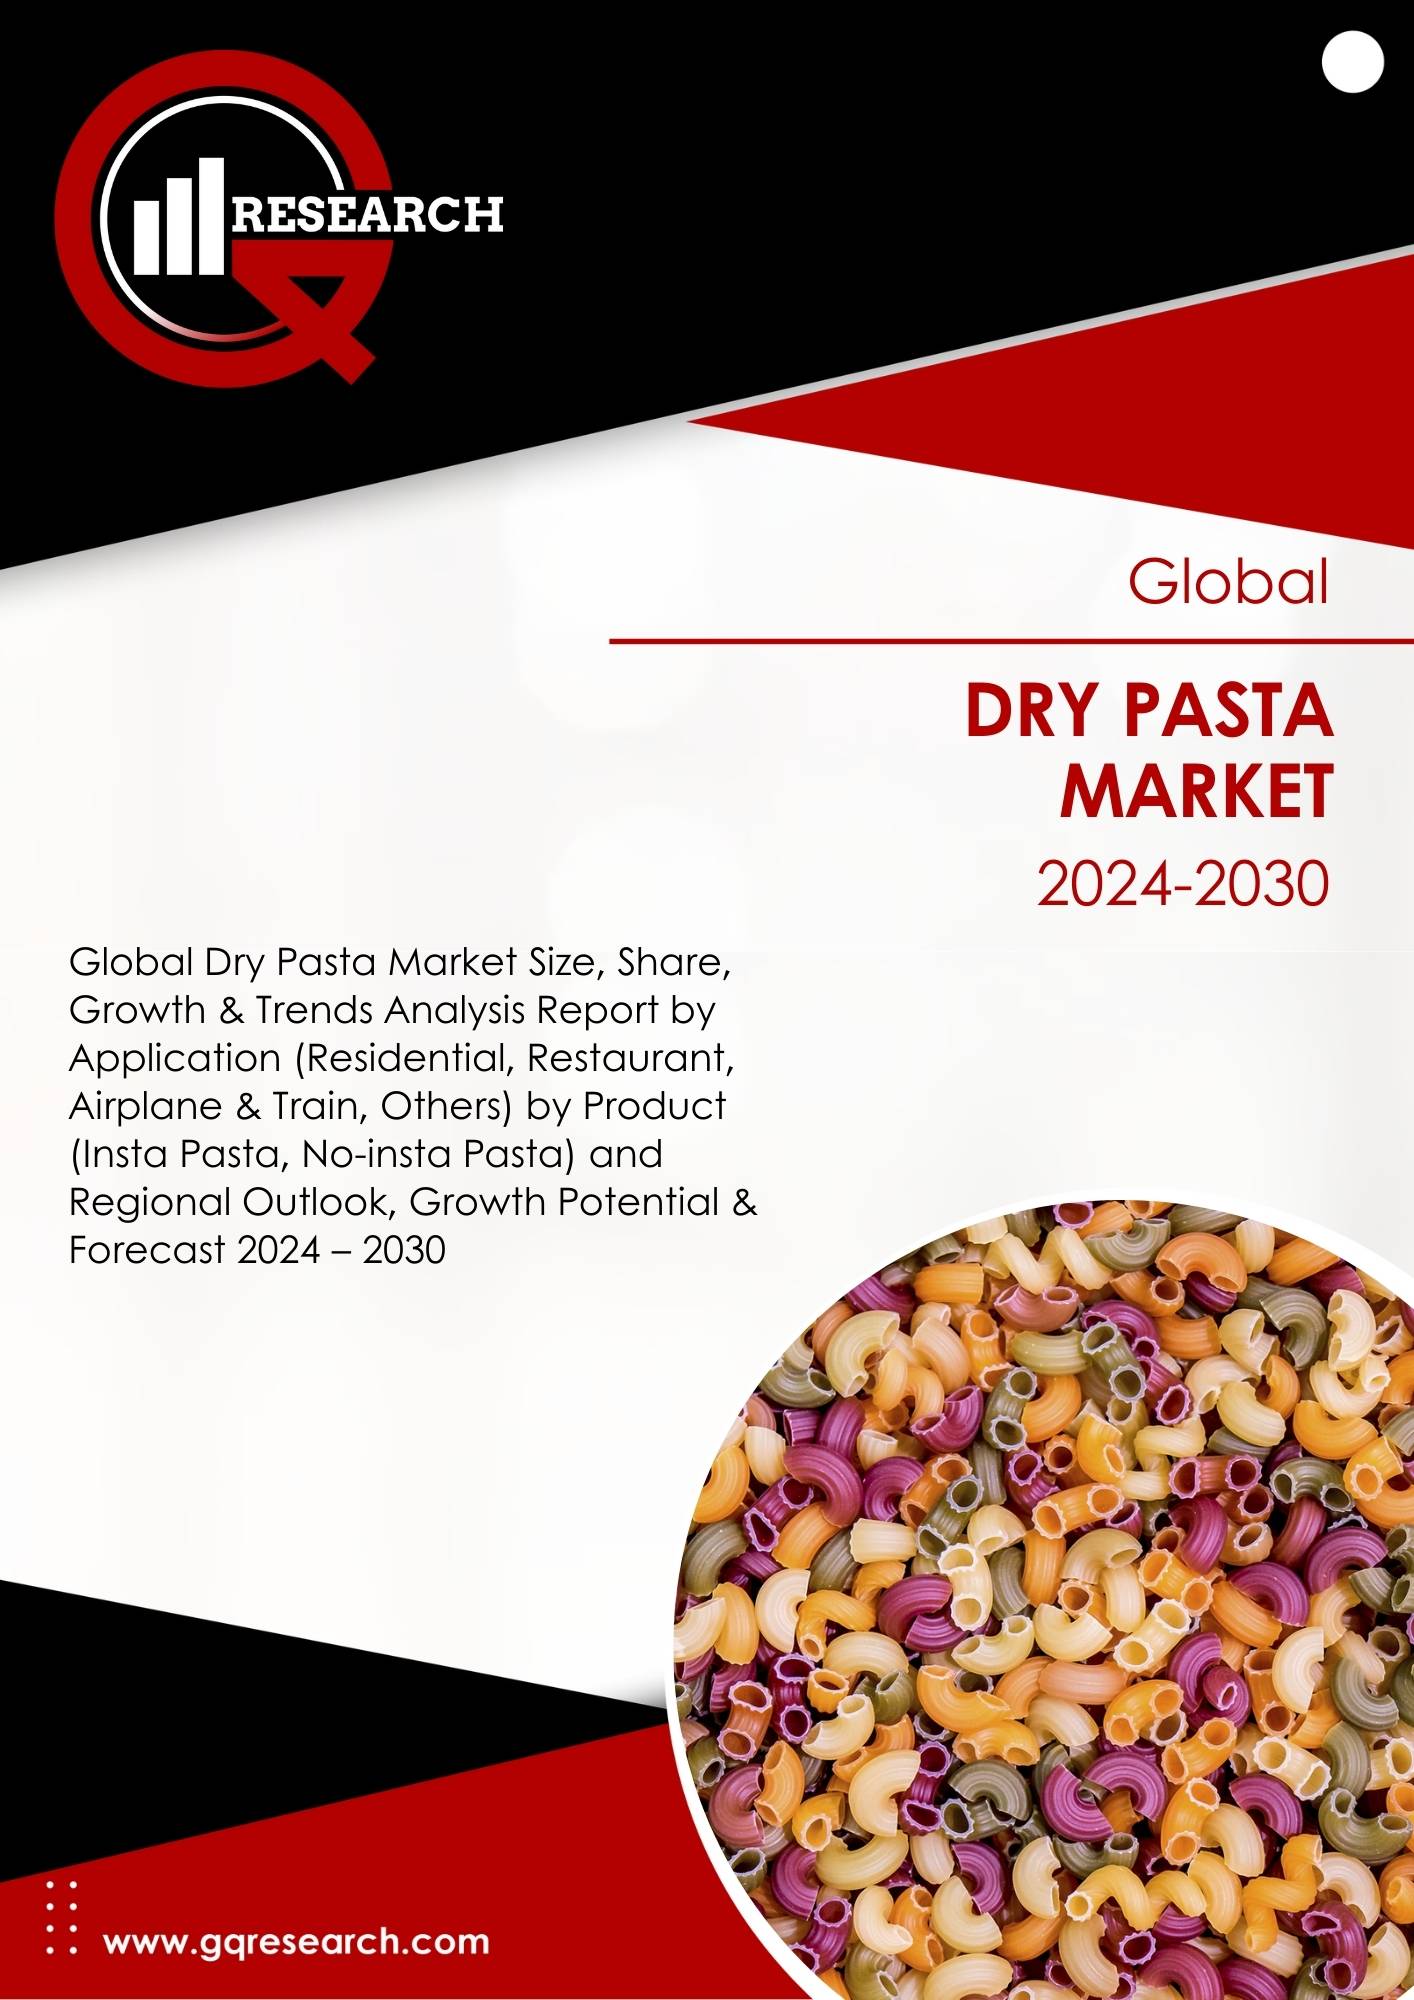 Dry Pasta Market Size, Share, Growth and Forecast to 2030 | GQ Research